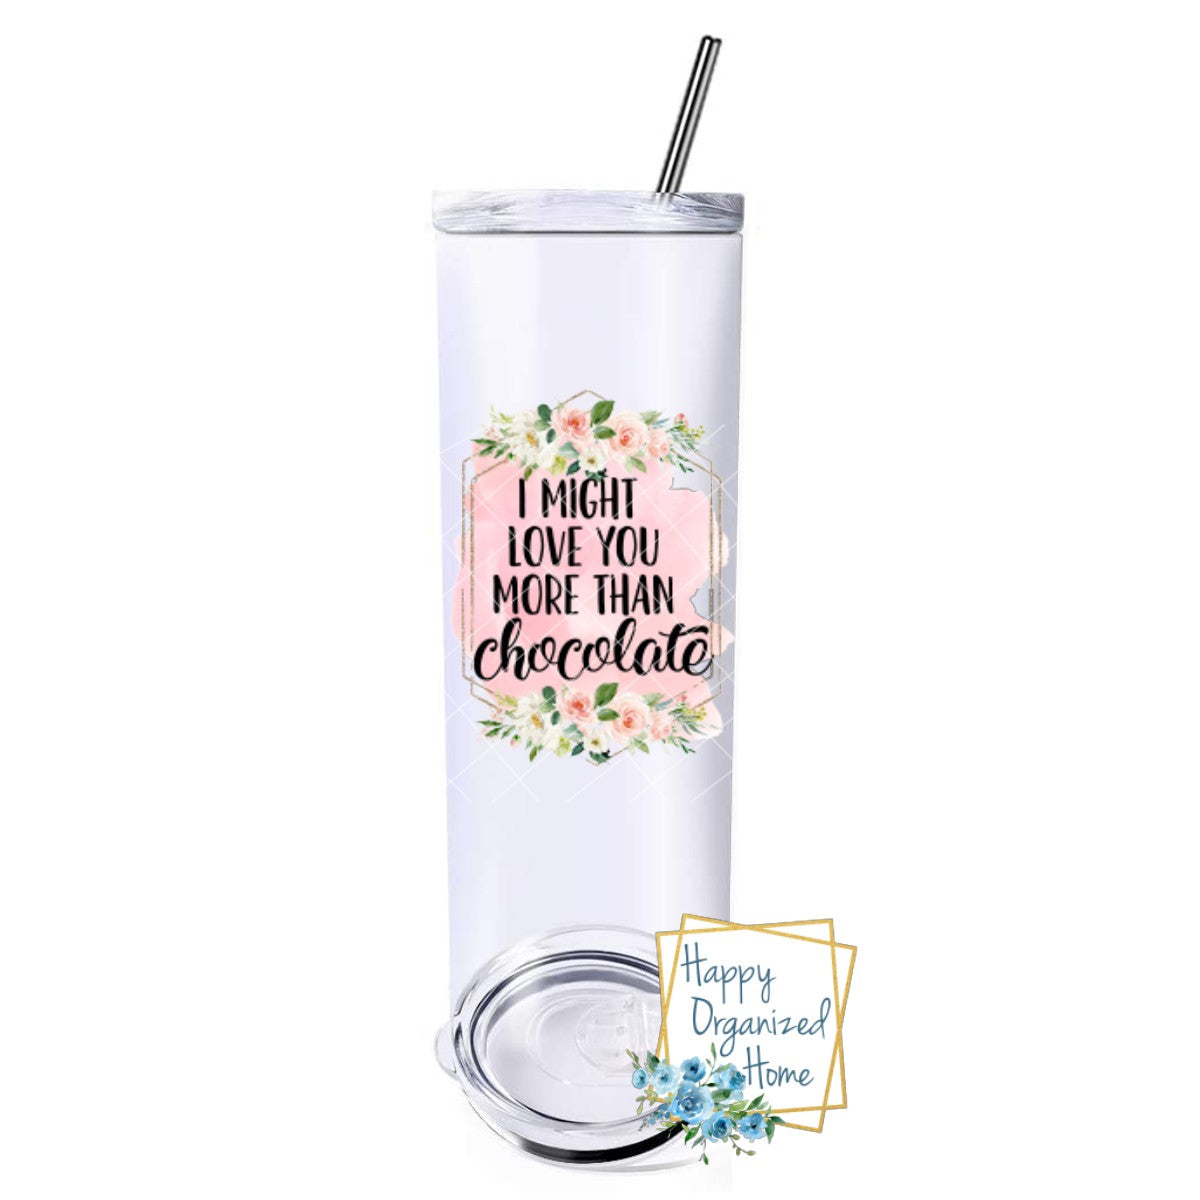 I might love you more than chocolate - Insulated tumbler with metal straw